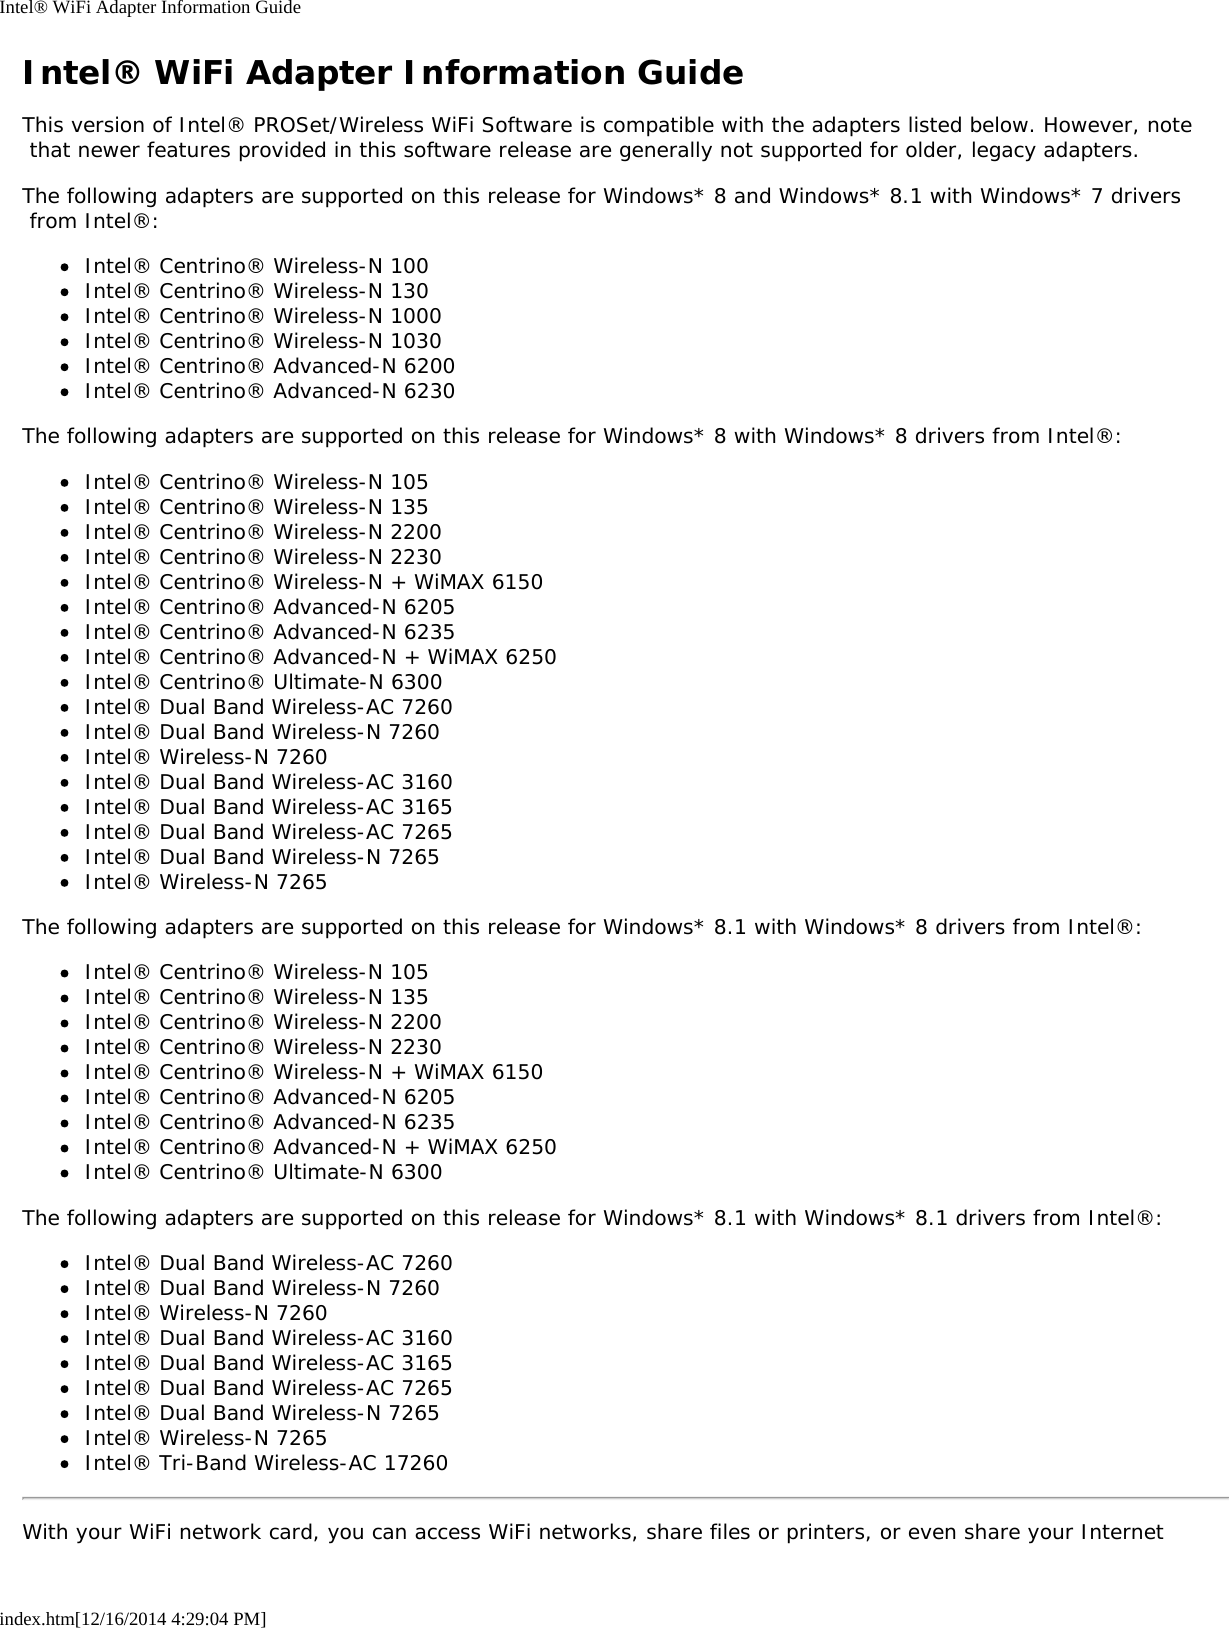 Intel® WiFi Adapter Information Guideindex.htm[12/16/2014 4:29:04 PM]Intel® WiFi Adapter Information GuideThis version of Intel® PROSet/Wireless WiFi Software is compatible with the adapters listed below. However, note that newer features provided in this software release are generally not supported for older, legacy adapters.The following adapters are supported on this release for Windows* 8 and Windows* 8.1 with Windows* 7 drivers from Intel®:Intel® Centrino® Wireless-N 100Intel® Centrino® Wireless-N 130Intel® Centrino® Wireless-N 1000Intel® Centrino® Wireless-N 1030Intel® Centrino® Advanced-N 6200Intel® Centrino® Advanced-N 6230The following adapters are supported on this release for Windows* 8 with Windows* 8 drivers from Intel®:Intel® Centrino® Wireless-N 105Intel® Centrino® Wireless-N 135Intel® Centrino® Wireless-N 2200Intel® Centrino® Wireless-N 2230Intel® Centrino® Wireless-N + WiMAX 6150Intel® Centrino® Advanced-N 6205Intel® Centrino® Advanced-N 6235Intel® Centrino® Advanced-N + WiMAX 6250Intel® Centrino® Ultimate-N 6300Intel® Dual Band Wireless-AC 7260Intel® Dual Band Wireless-N 7260Intel® Wireless-N 7260Intel® Dual Band Wireless-AC 3160Intel® Dual Band Wireless-AC 3165Intel® Dual Band Wireless-AC 7265Intel® Dual Band Wireless-N 7265Intel® Wireless-N 7265The following adapters are supported on this release for Windows* 8.1 with Windows* 8 drivers from Intel®:Intel® Centrino® Wireless-N 105Intel® Centrino® Wireless-N 135Intel® Centrino® Wireless-N 2200Intel® Centrino® Wireless-N 2230Intel® Centrino® Wireless-N + WiMAX 6150Intel® Centrino® Advanced-N 6205Intel® Centrino® Advanced-N 6235Intel® Centrino® Advanced-N + WiMAX 6250Intel® Centrino® Ultimate-N 6300The following adapters are supported on this release for Windows* 8.1 with Windows* 8.1 drivers from Intel®:Intel® Dual Band Wireless-AC 7260Intel® Dual Band Wireless-N 7260Intel® Wireless-N 7260Intel® Dual Band Wireless-AC 3160Intel® Dual Band Wireless-AC 3165Intel® Dual Band Wireless-AC 7265Intel® Dual Band Wireless-N 7265Intel® Wireless-N 7265Intel® Tri-Band Wireless-AC 17260With your WiFi network card, you can access WiFi networks, share files or printers, or even share your Internet